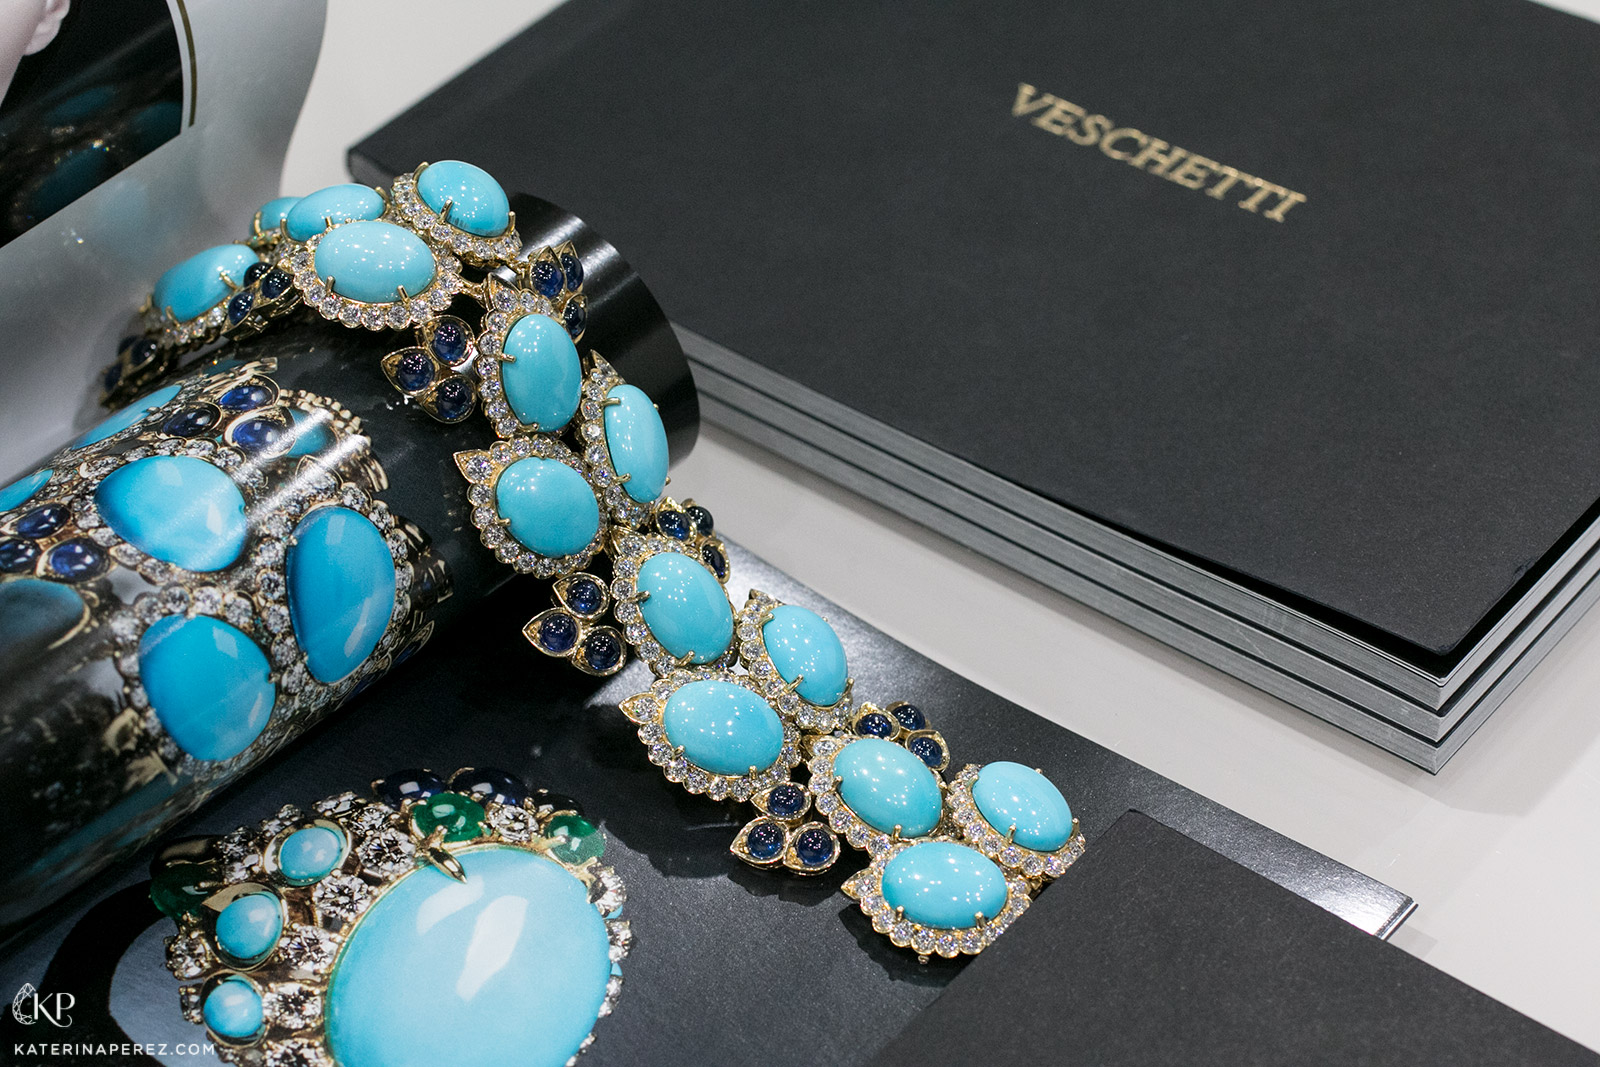 Veschetti bracelet with turquoise cabochons, sapphires and diamonds in yellow gold